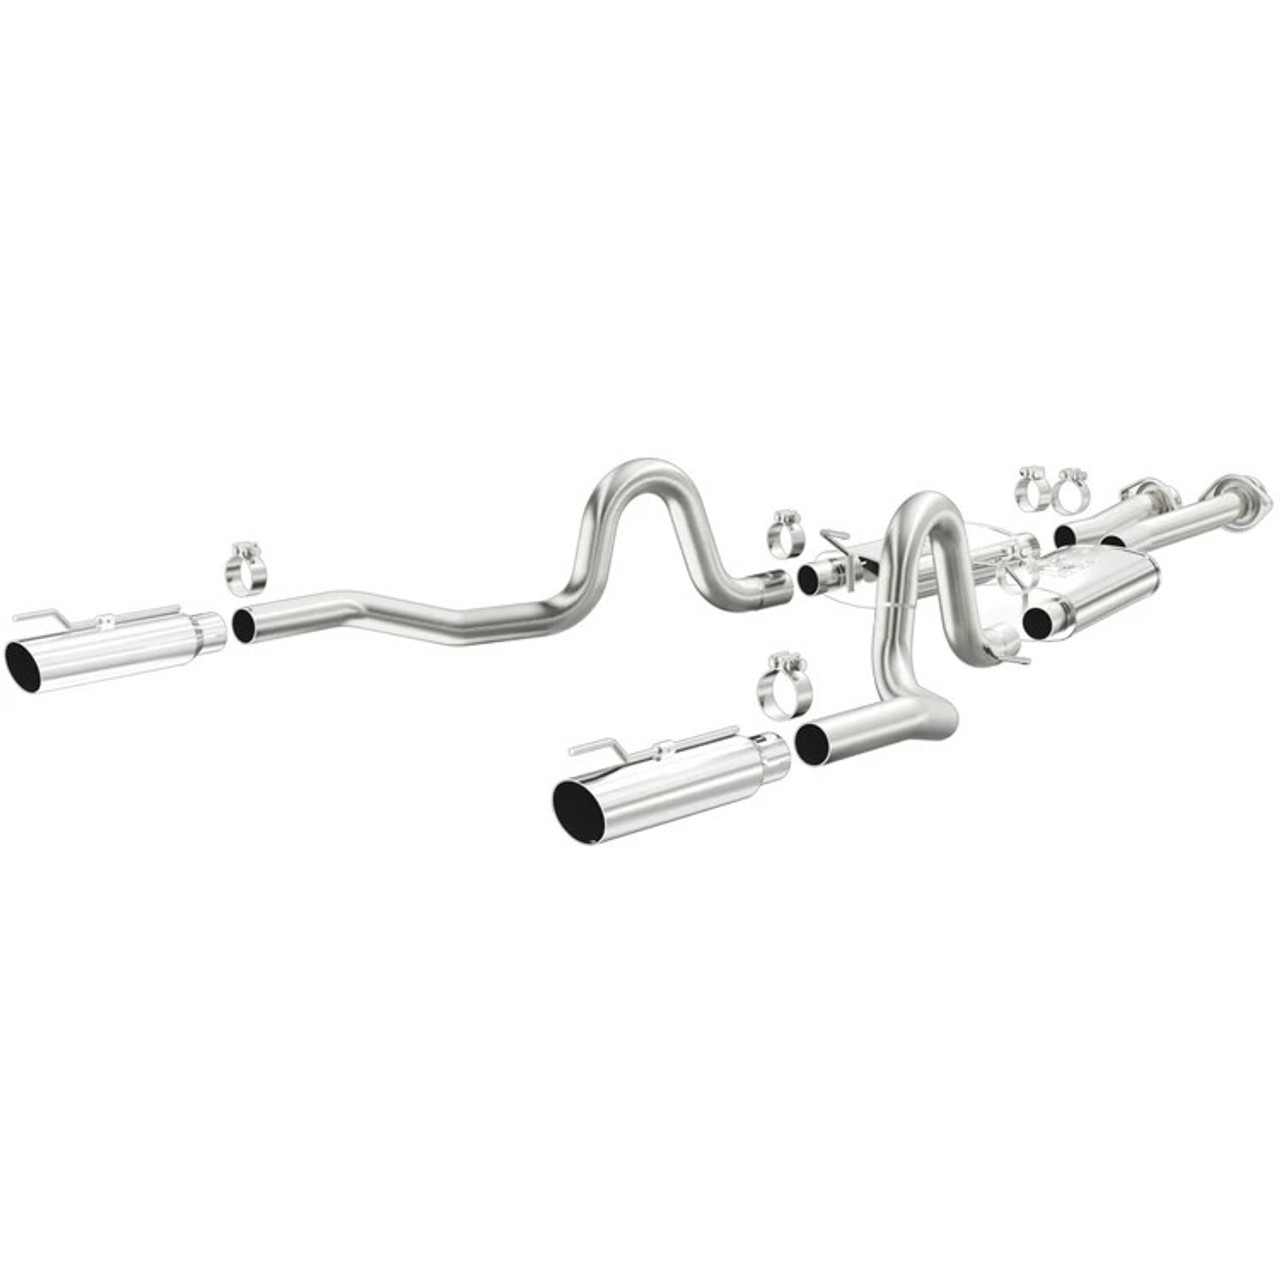 MagnaFlow Sys C/B Ford Mustang Gt 4.6L 99-04 (PN: 15671)